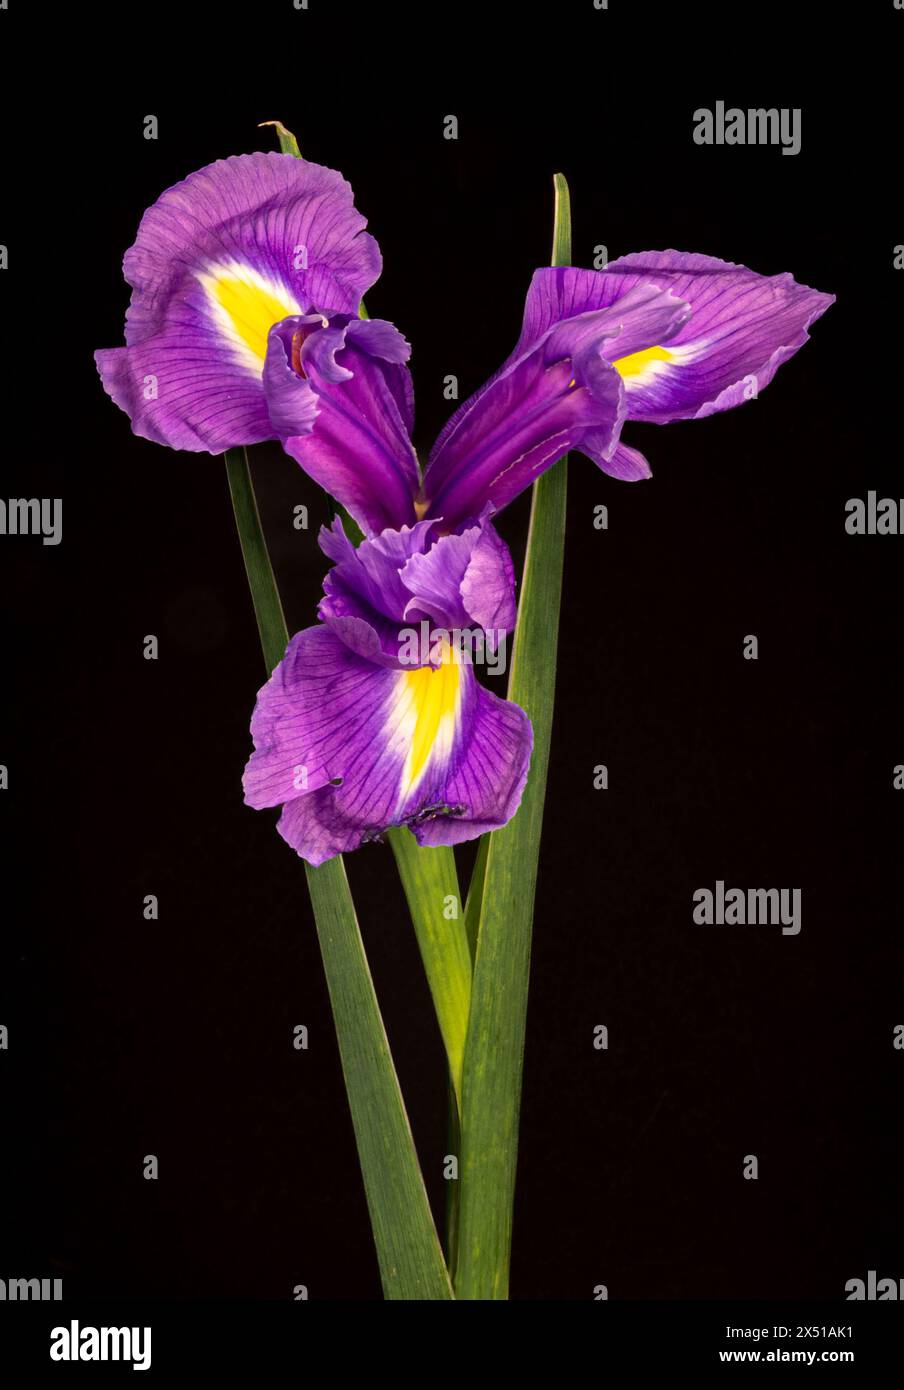 Iris Hollandica Sapphire Beauty ornamental flowering plant, purple violet and partly yellow flowers in bloom on green stem. Stock Photo